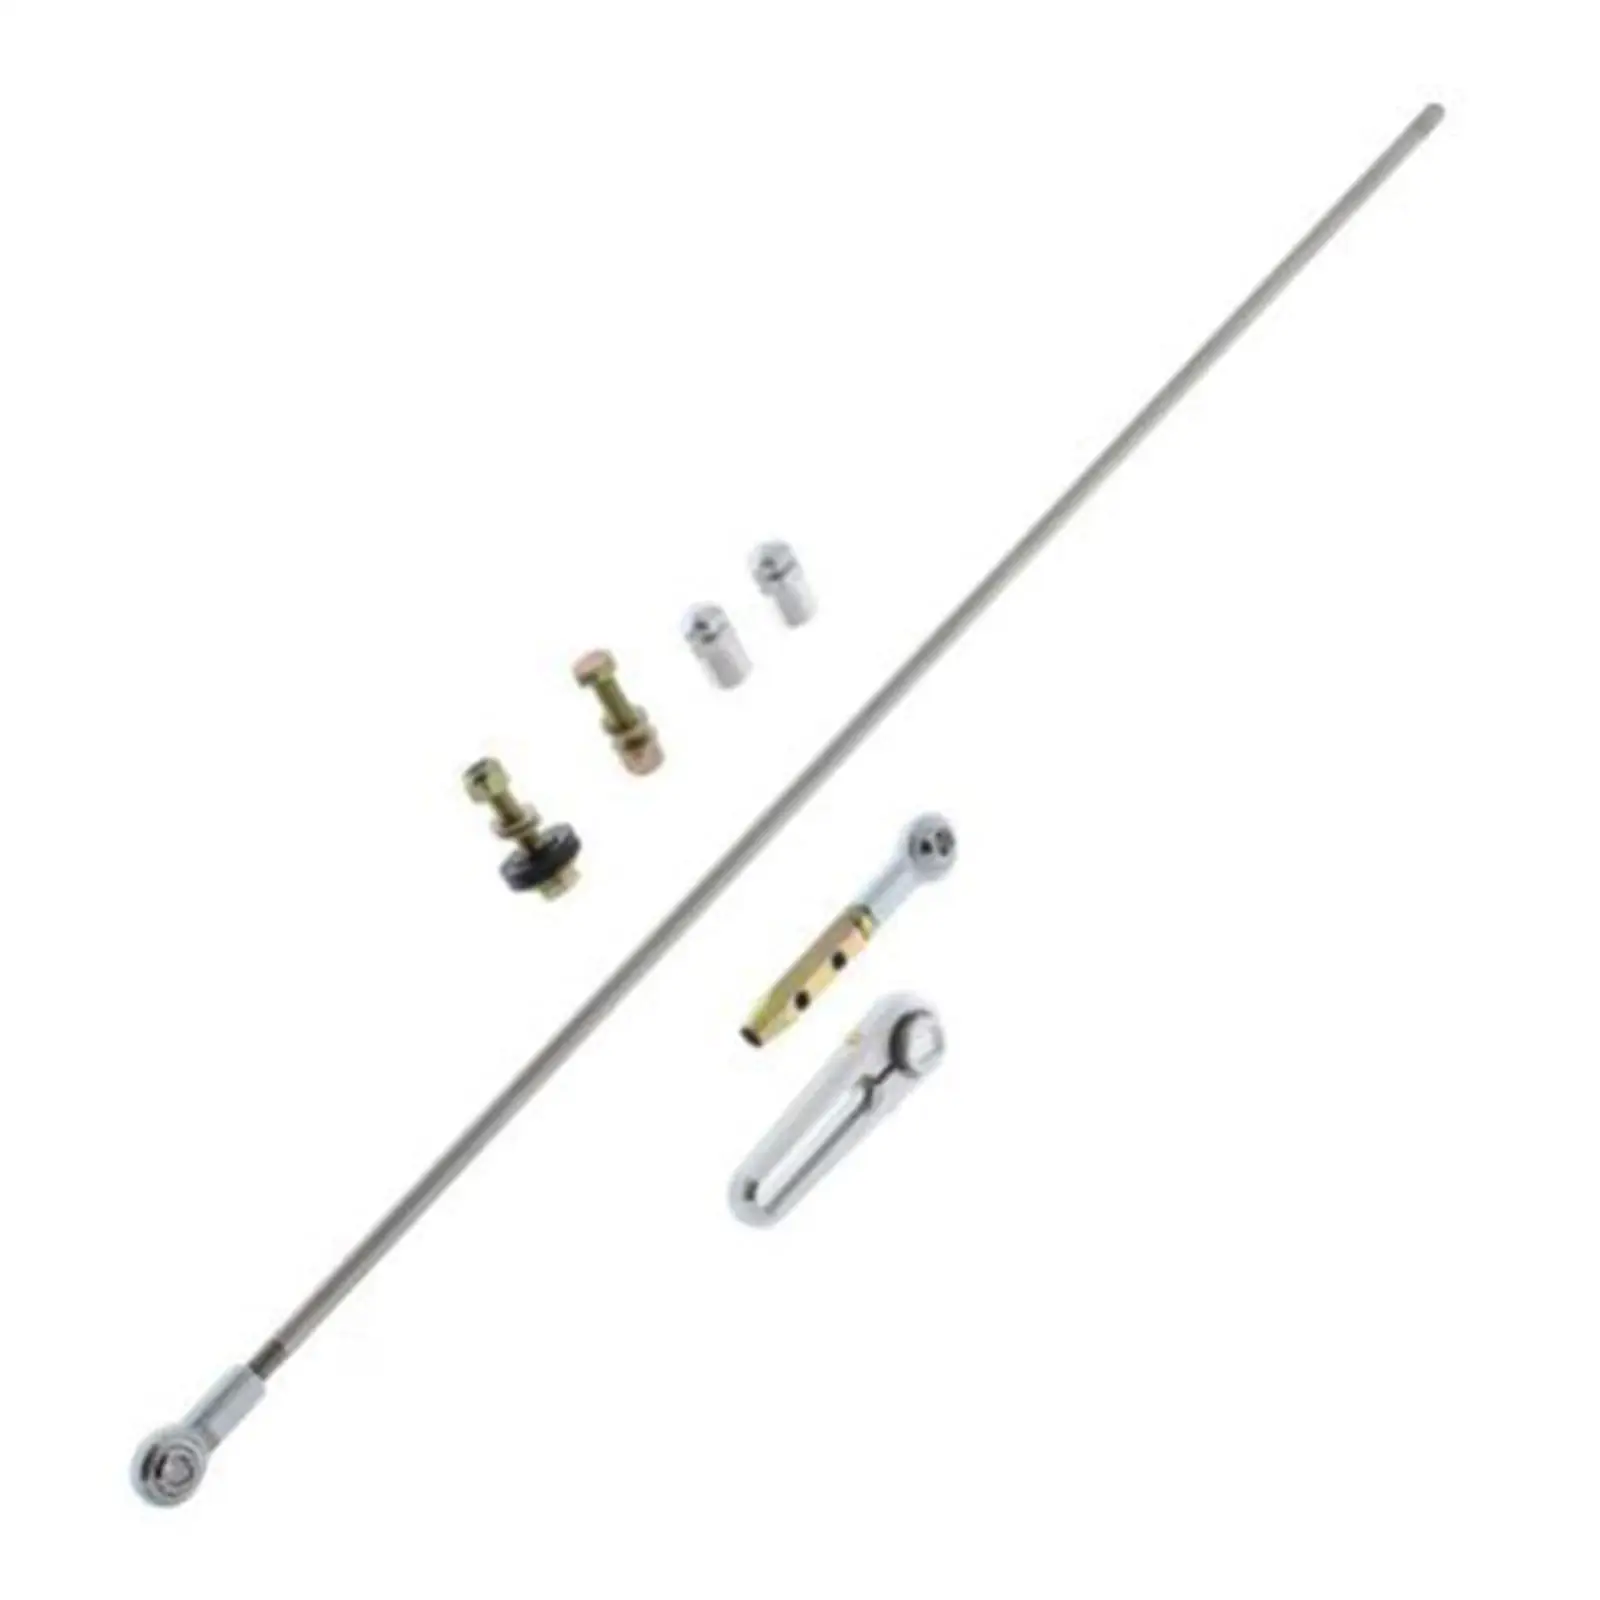 Transmission Column Shift Linkage Kit Easy to Mount Premium High Performance Spare Parts Car Accessories for GM 700R4 4L60